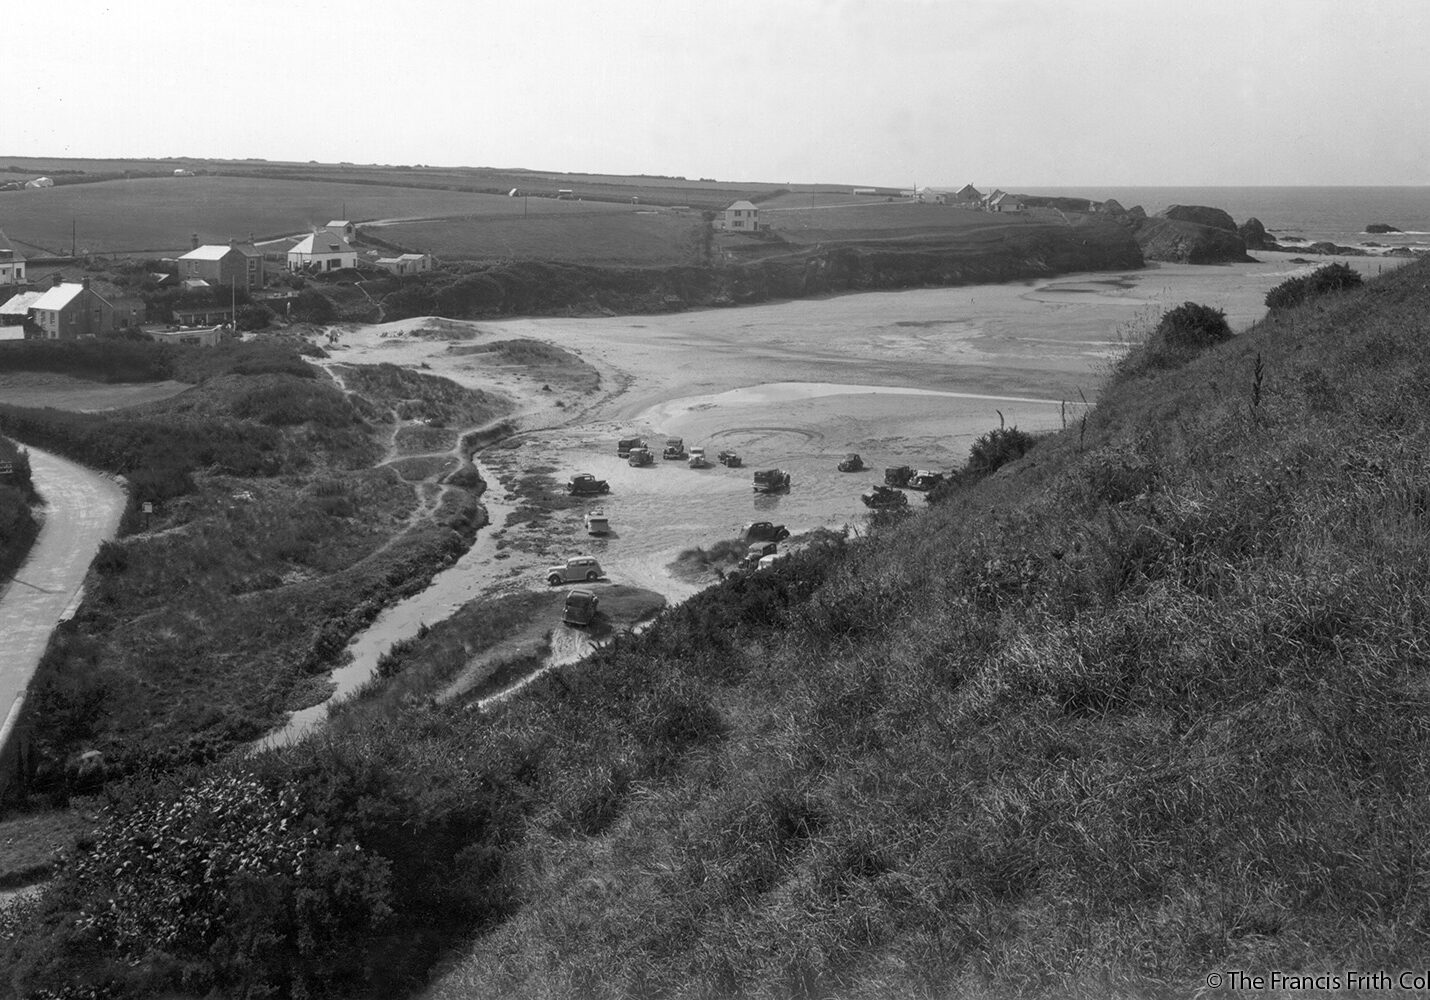 Porthcothan beach, 1937. Image courtesy of the Francis Frith collection.